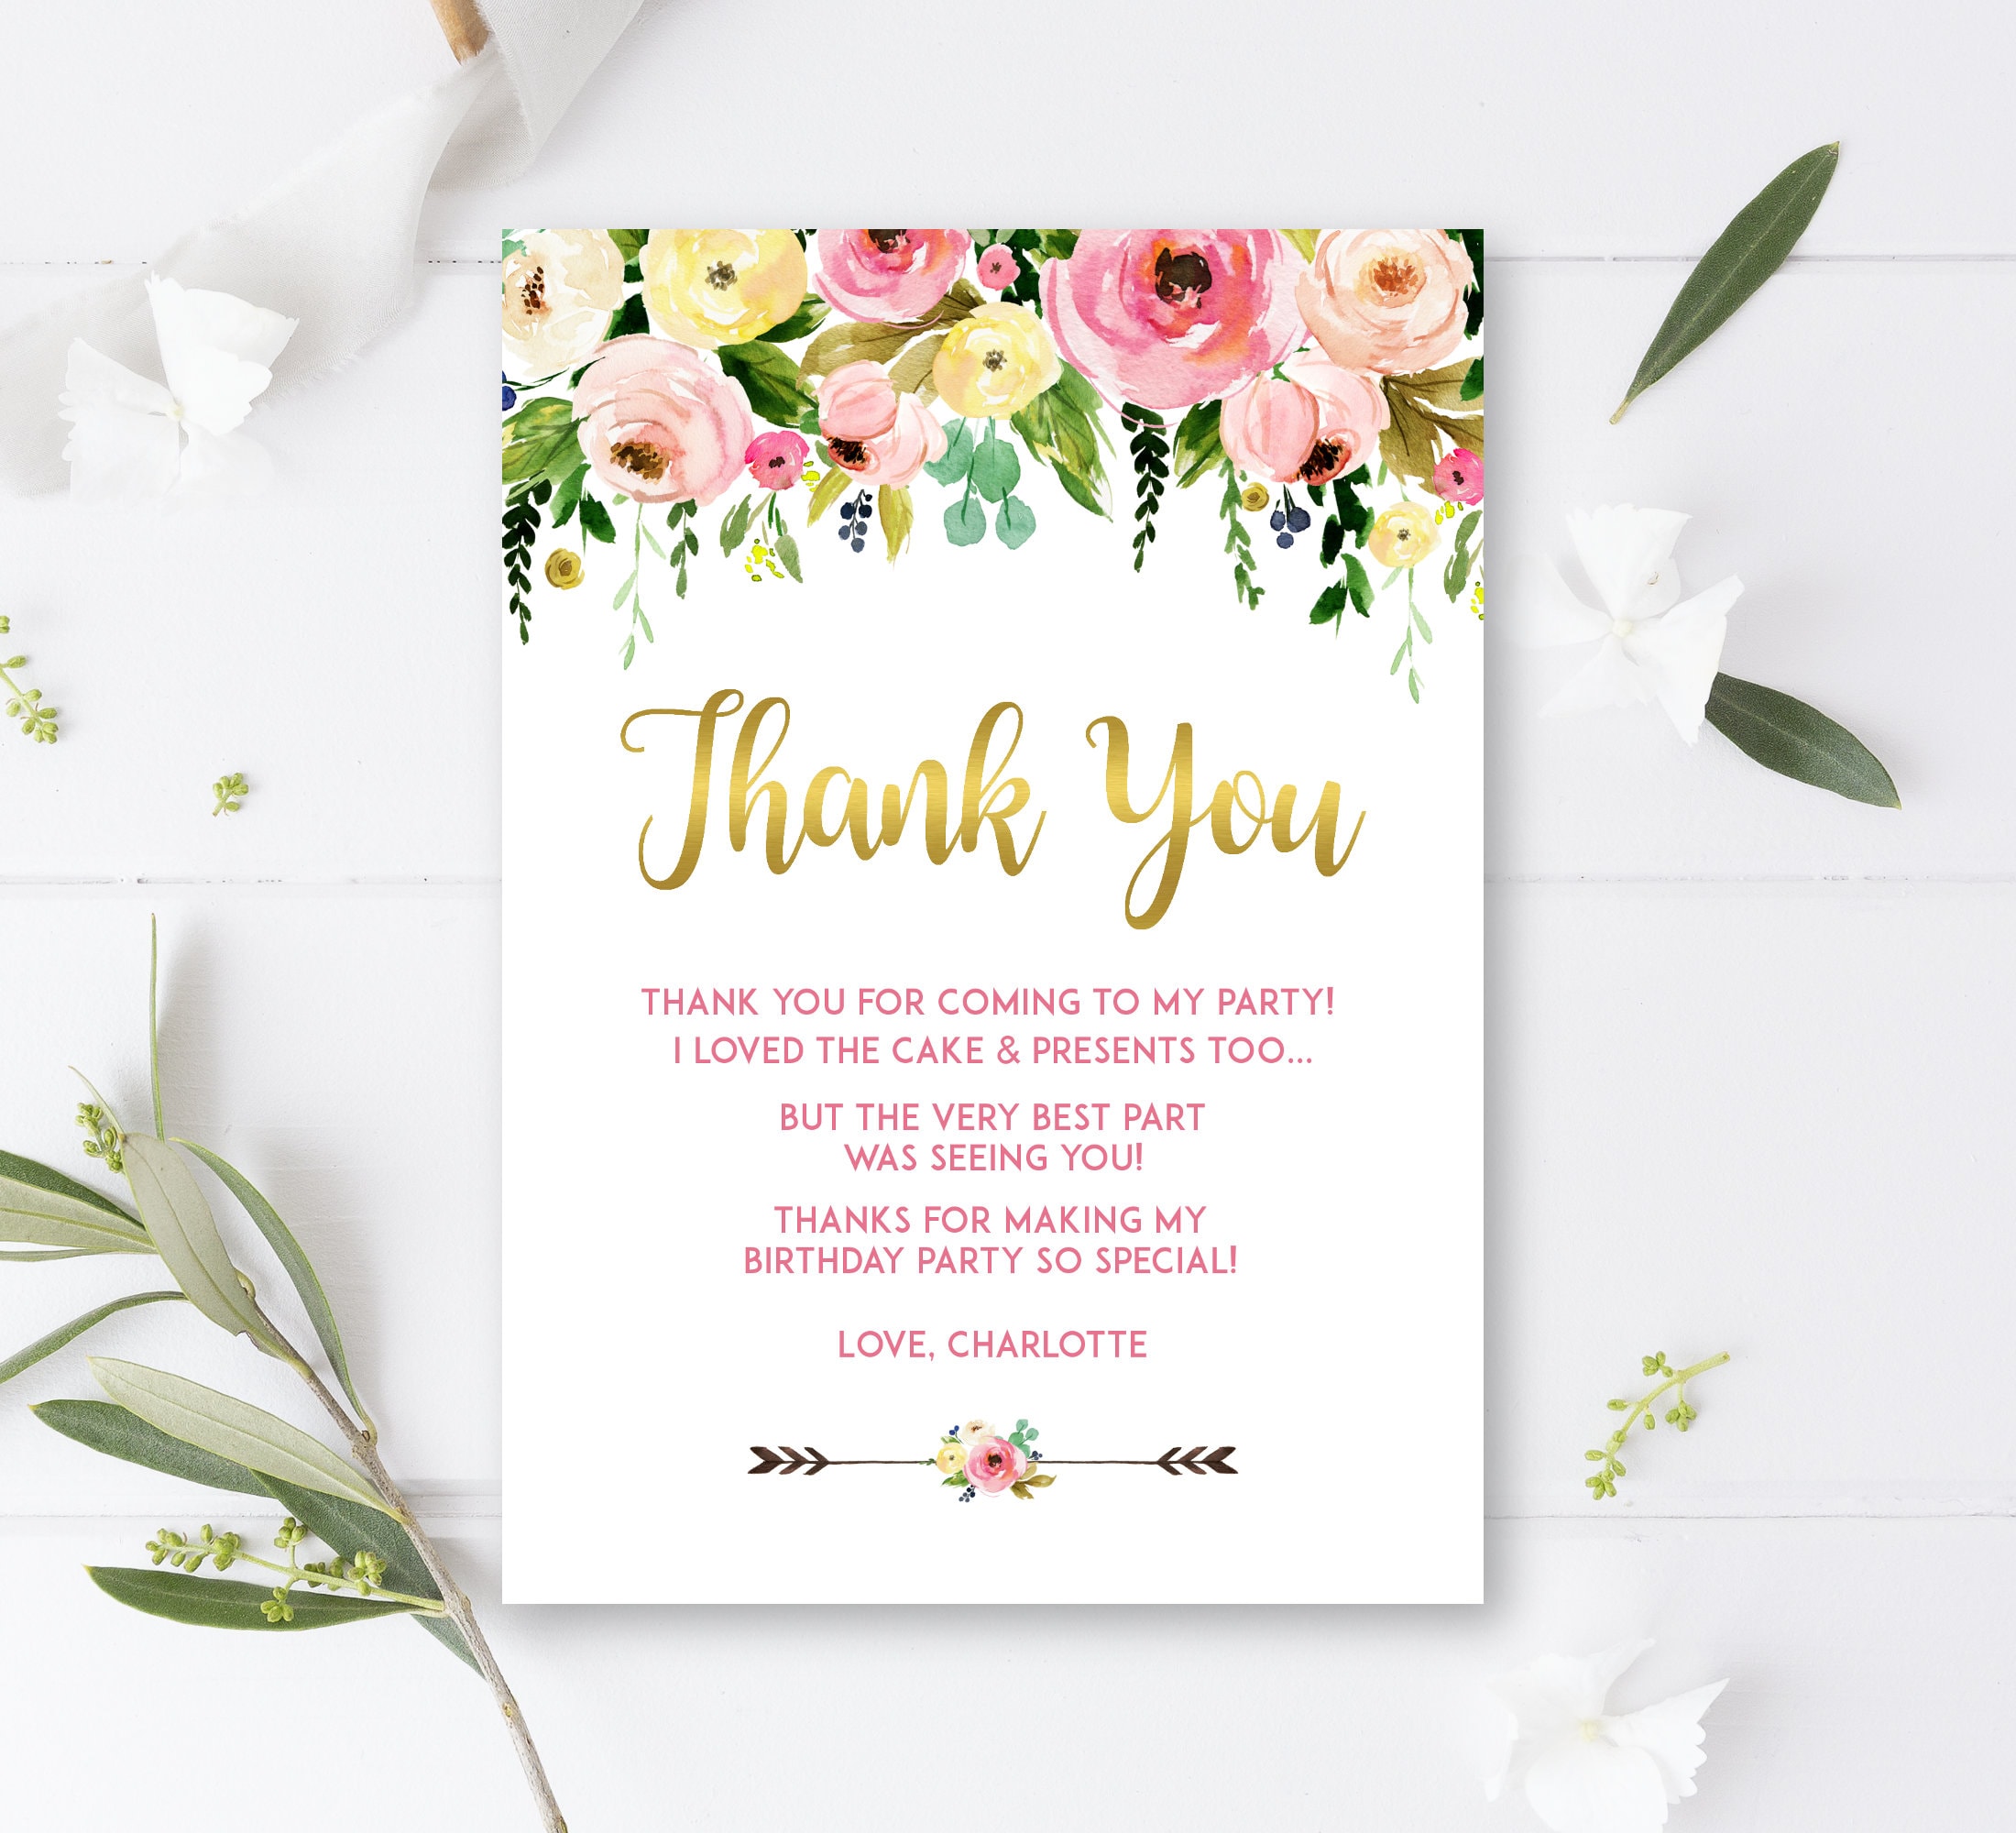 Custom Thank You Cards Wildflower Girl First Birthday Pink and Gold Thank You Note Cards Printable A15